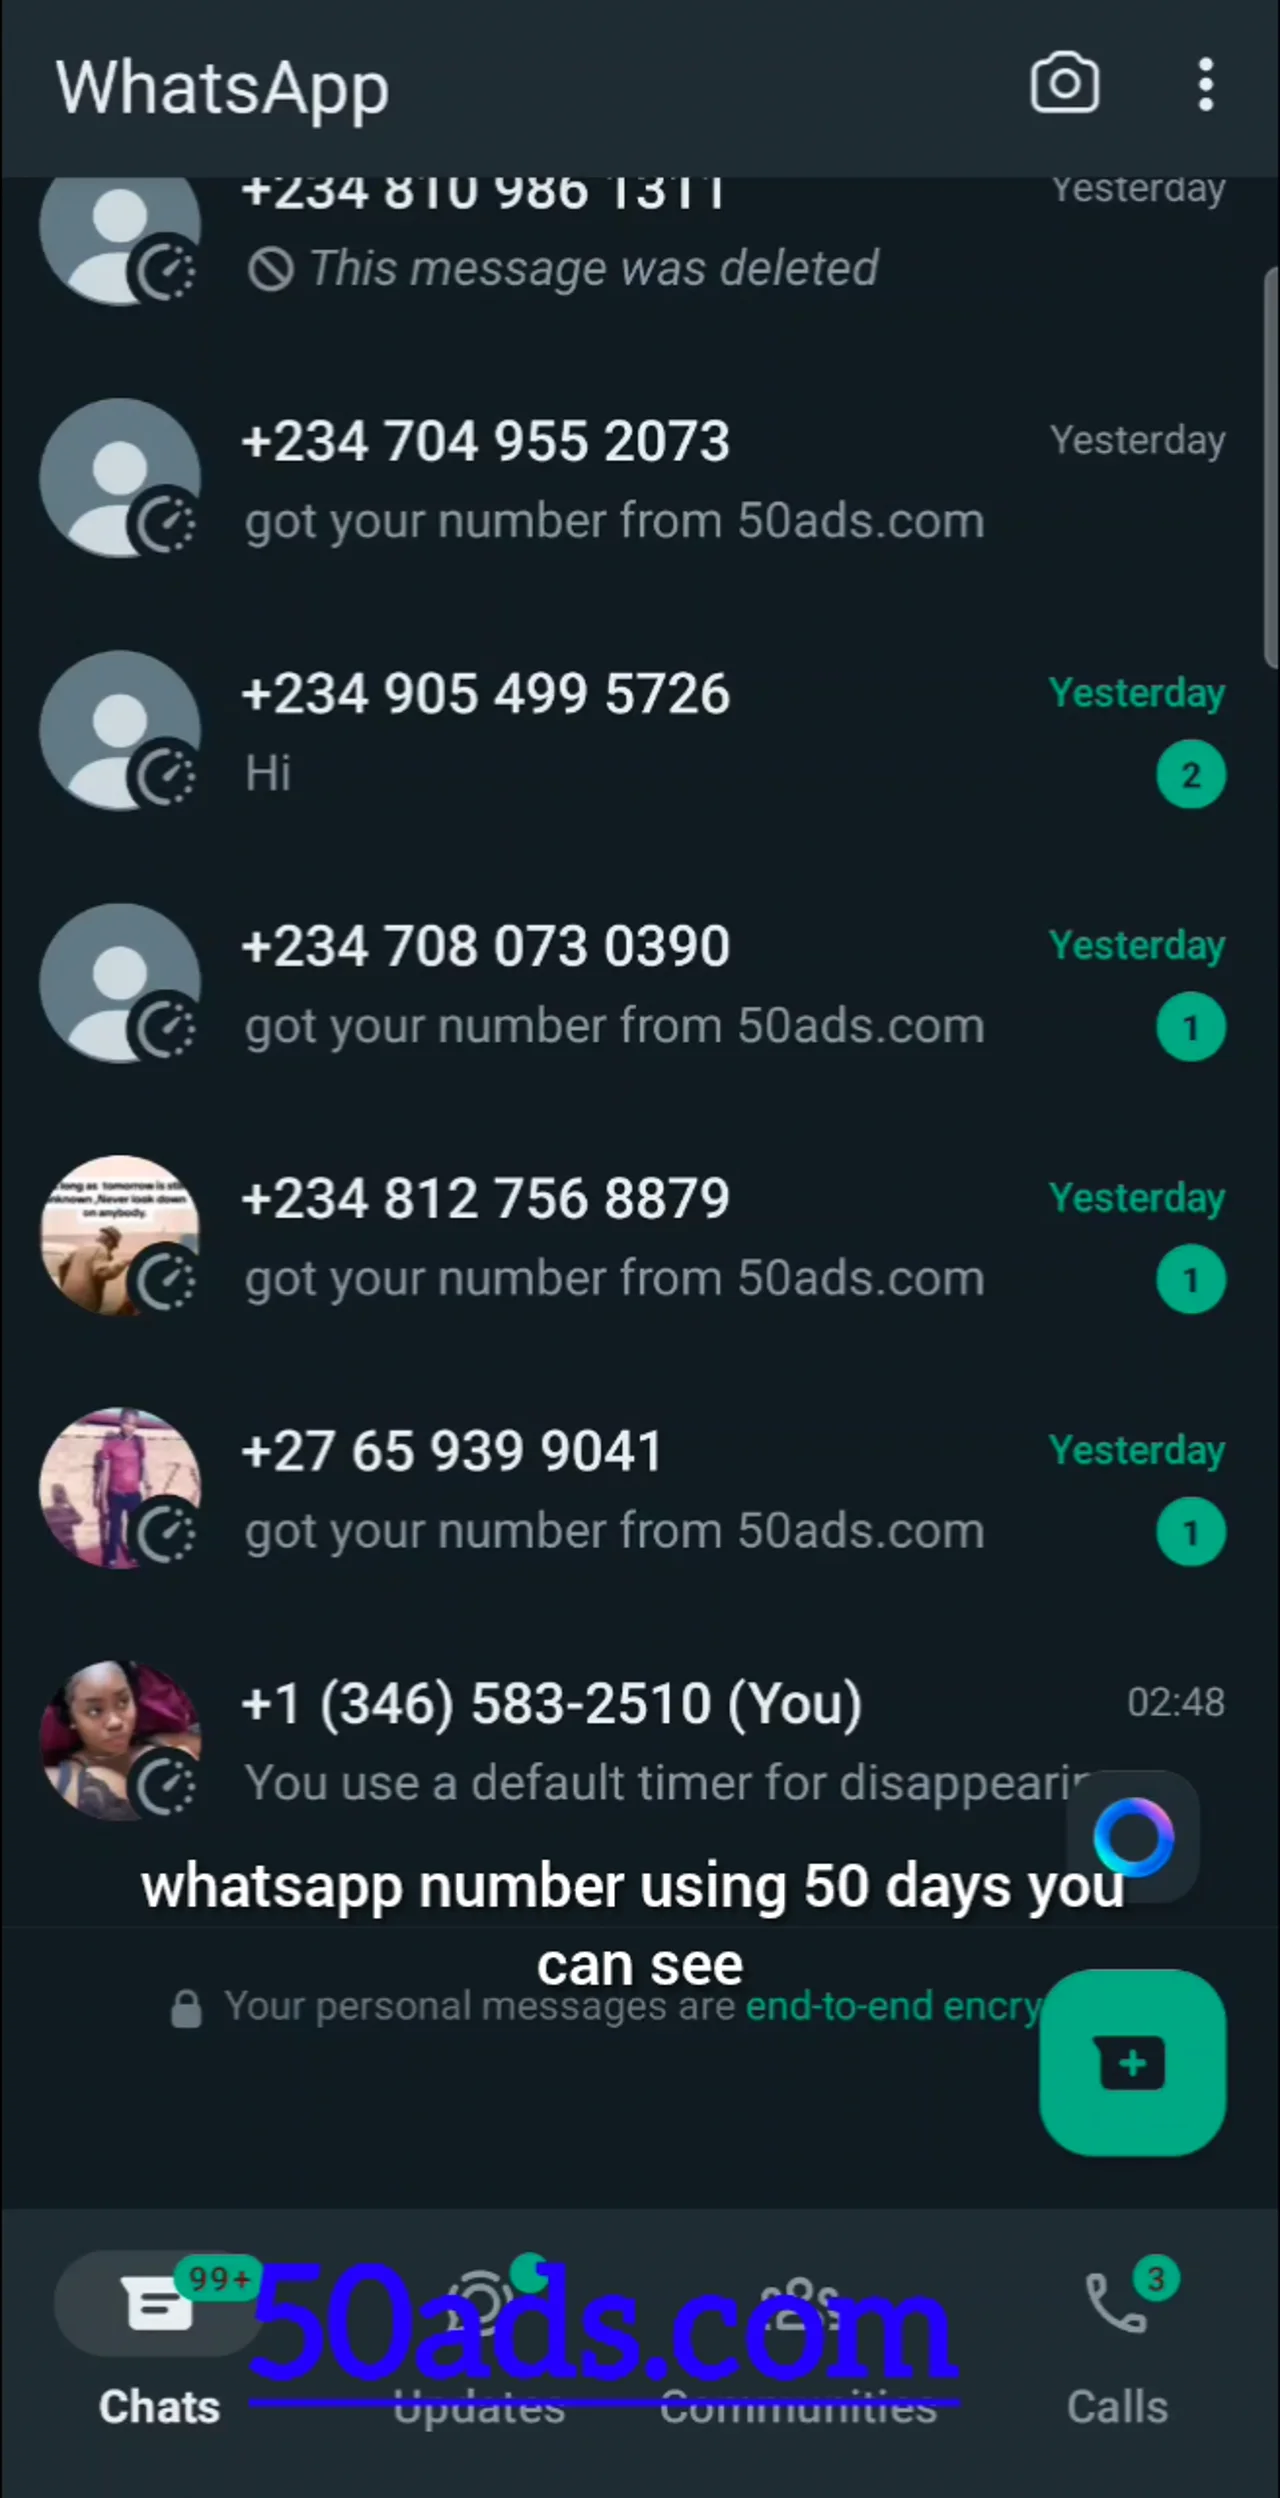 recieve 1000 whatsapp message to your whatsapp number in 1 day post add up on 50ads.com